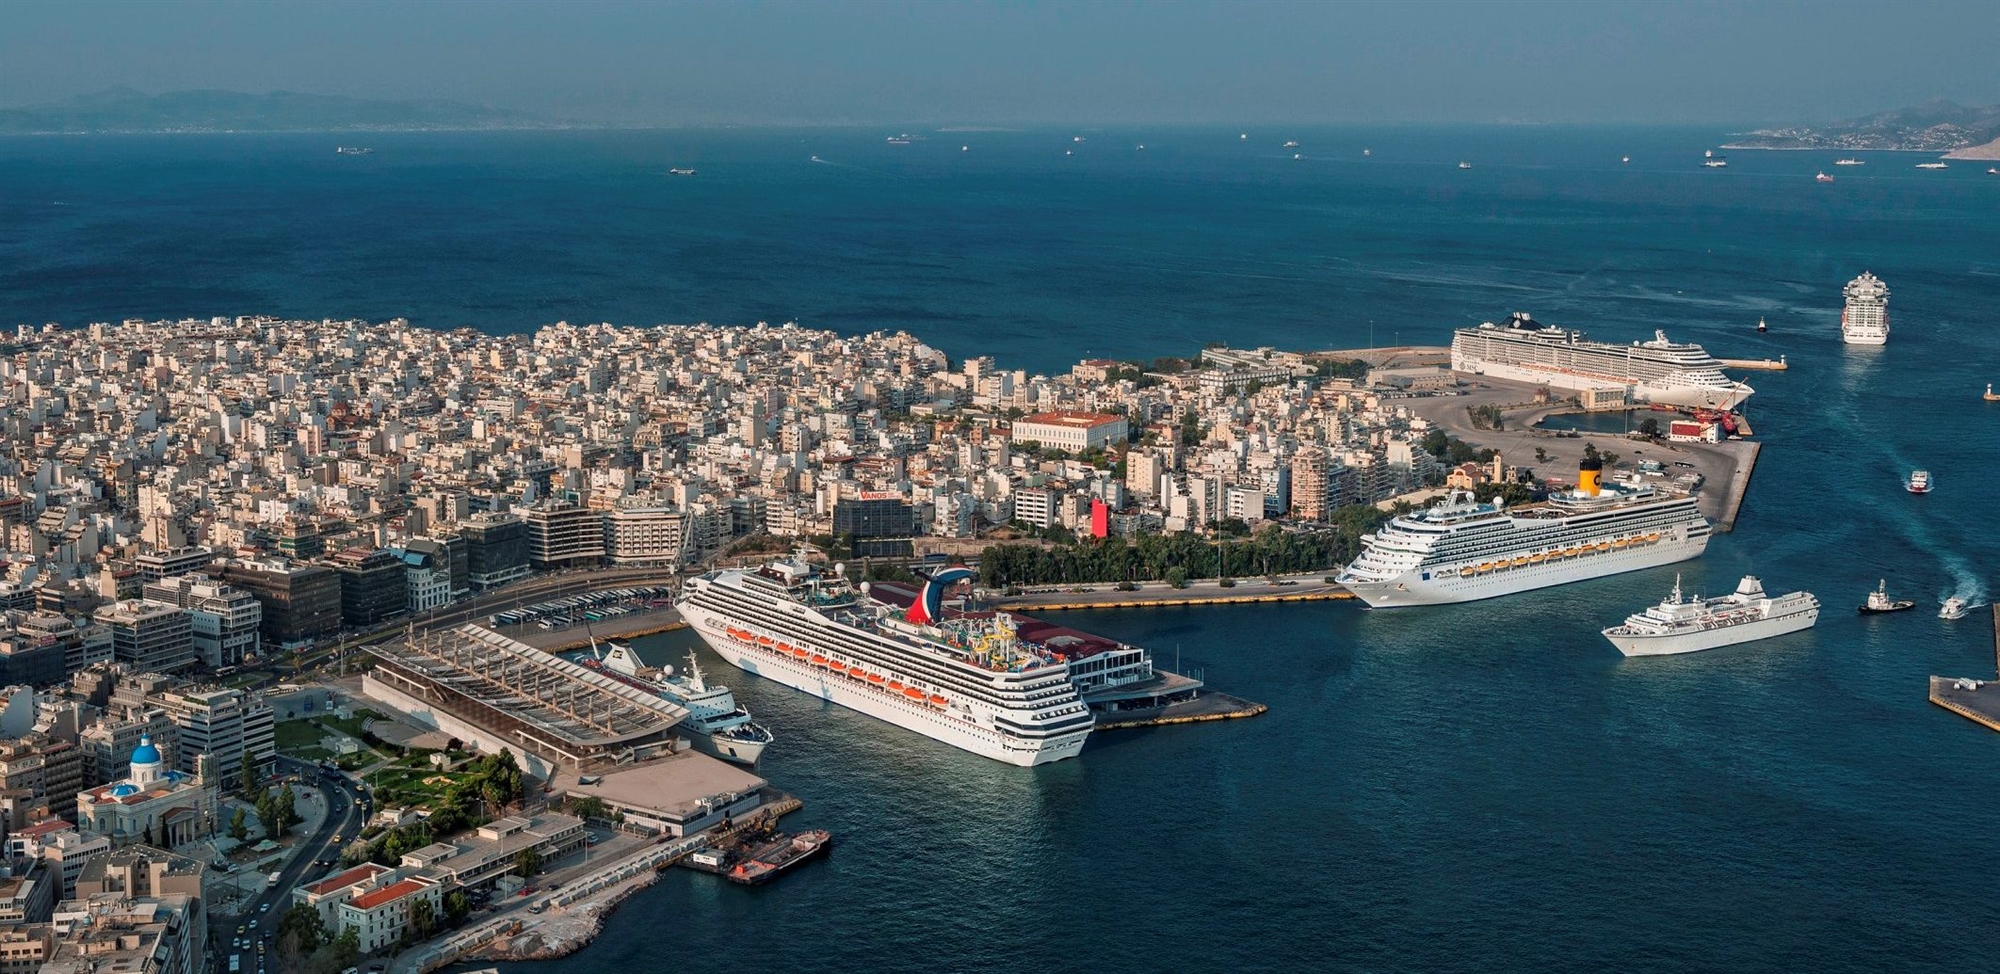 Greece considers limiting cruise ship visits to combat over-tourism